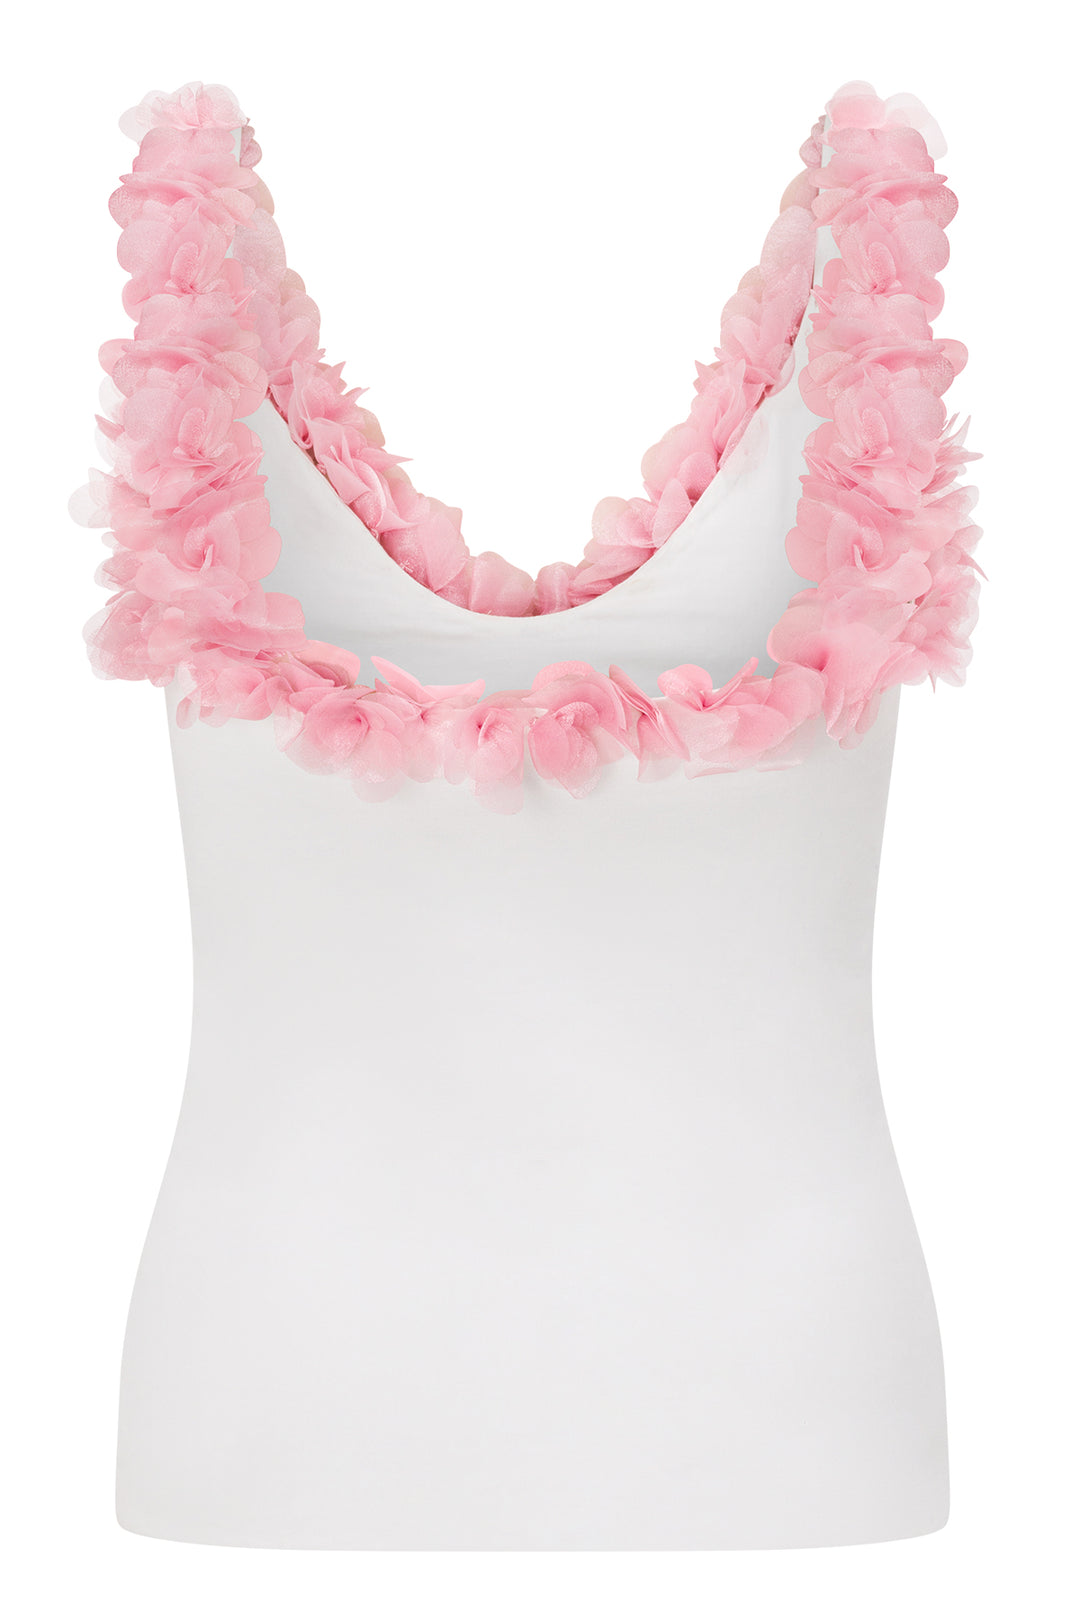 In Full Bloom Applique Tank by Bonita Collective